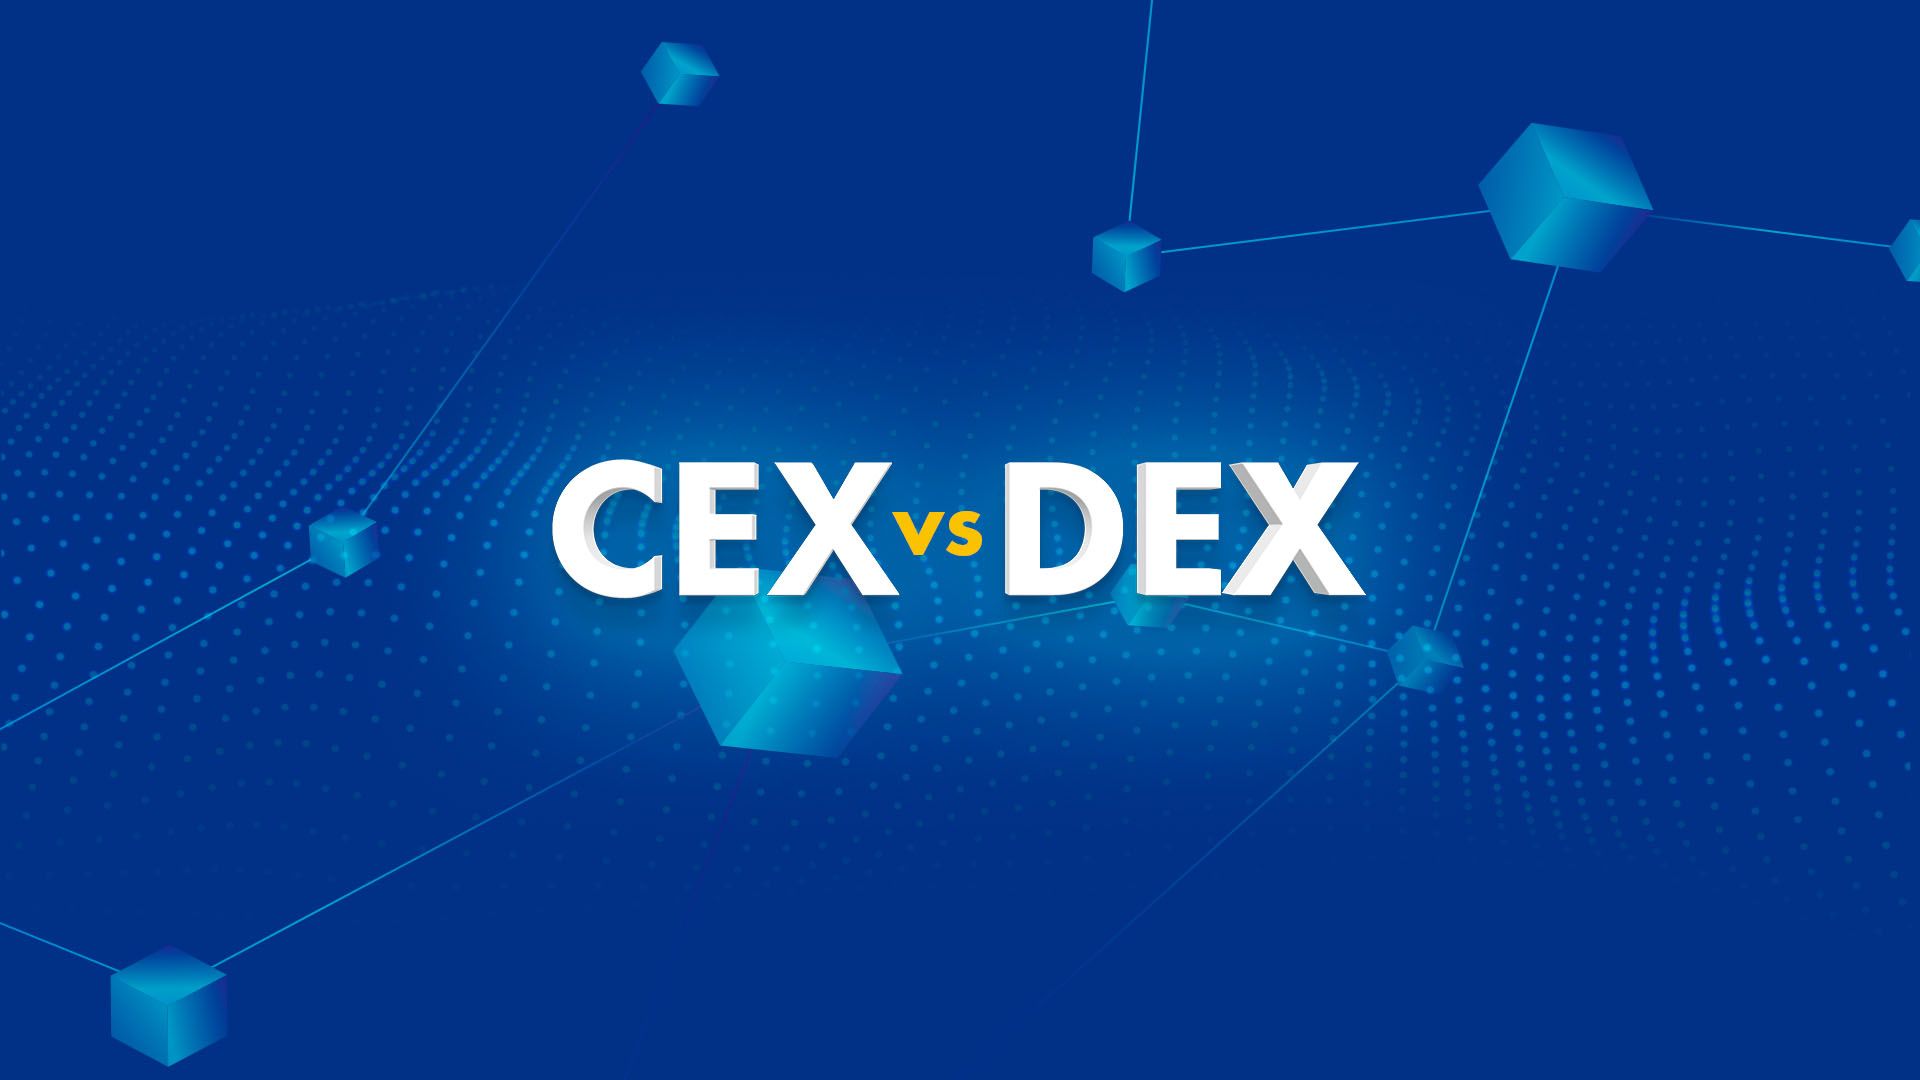 CEX vs DEX: what’s the difference?